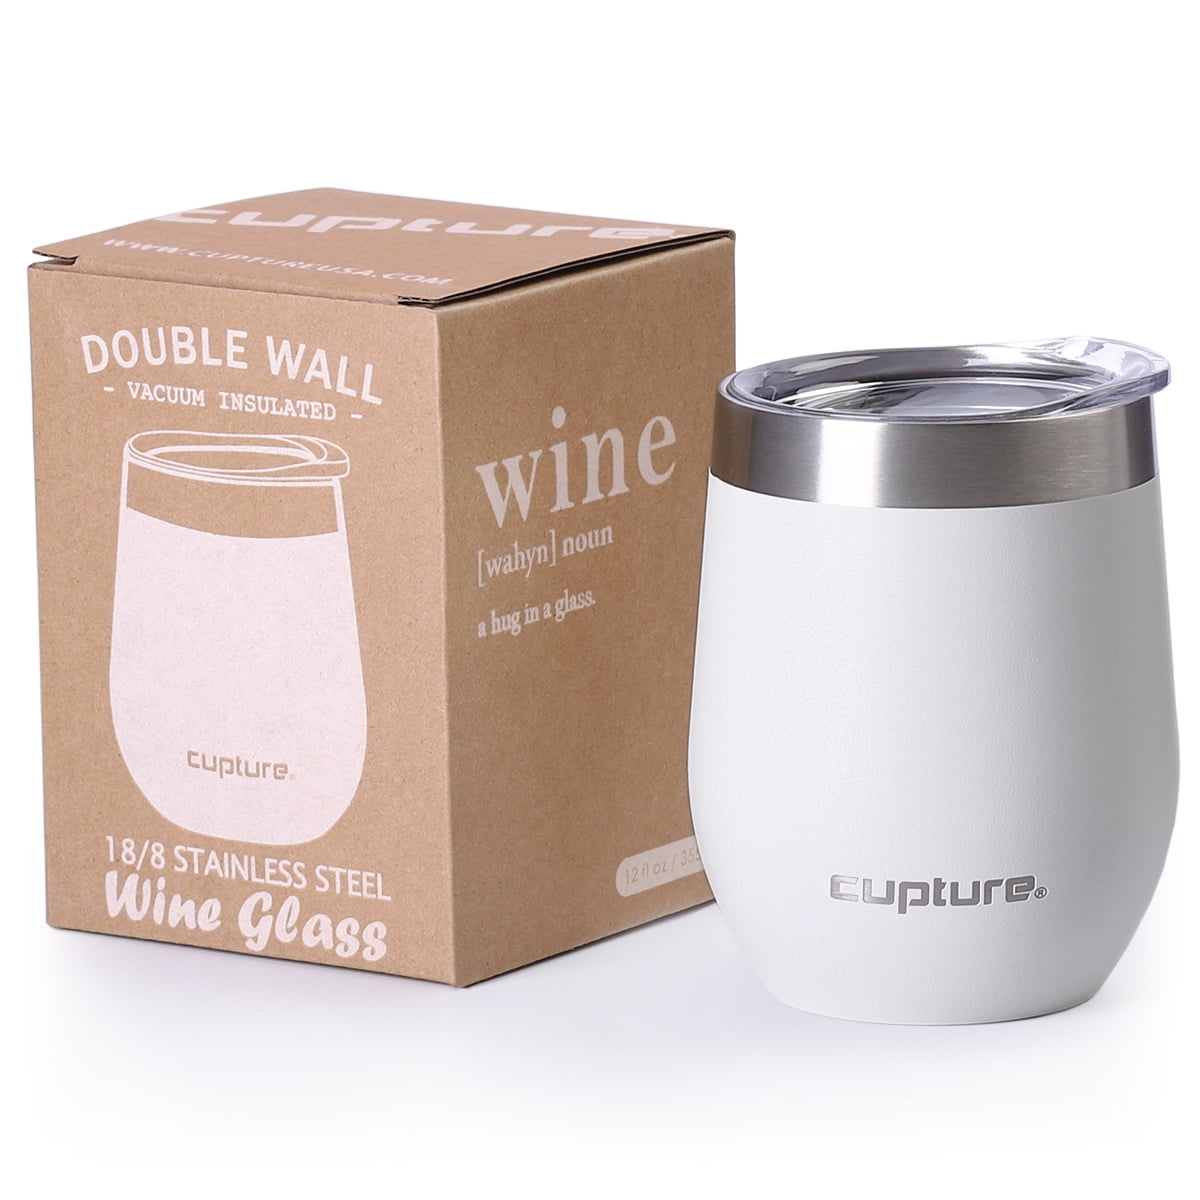 Double Wall Vacuum Insulated Stainless Steel Wine Tumbler 14 fl oz